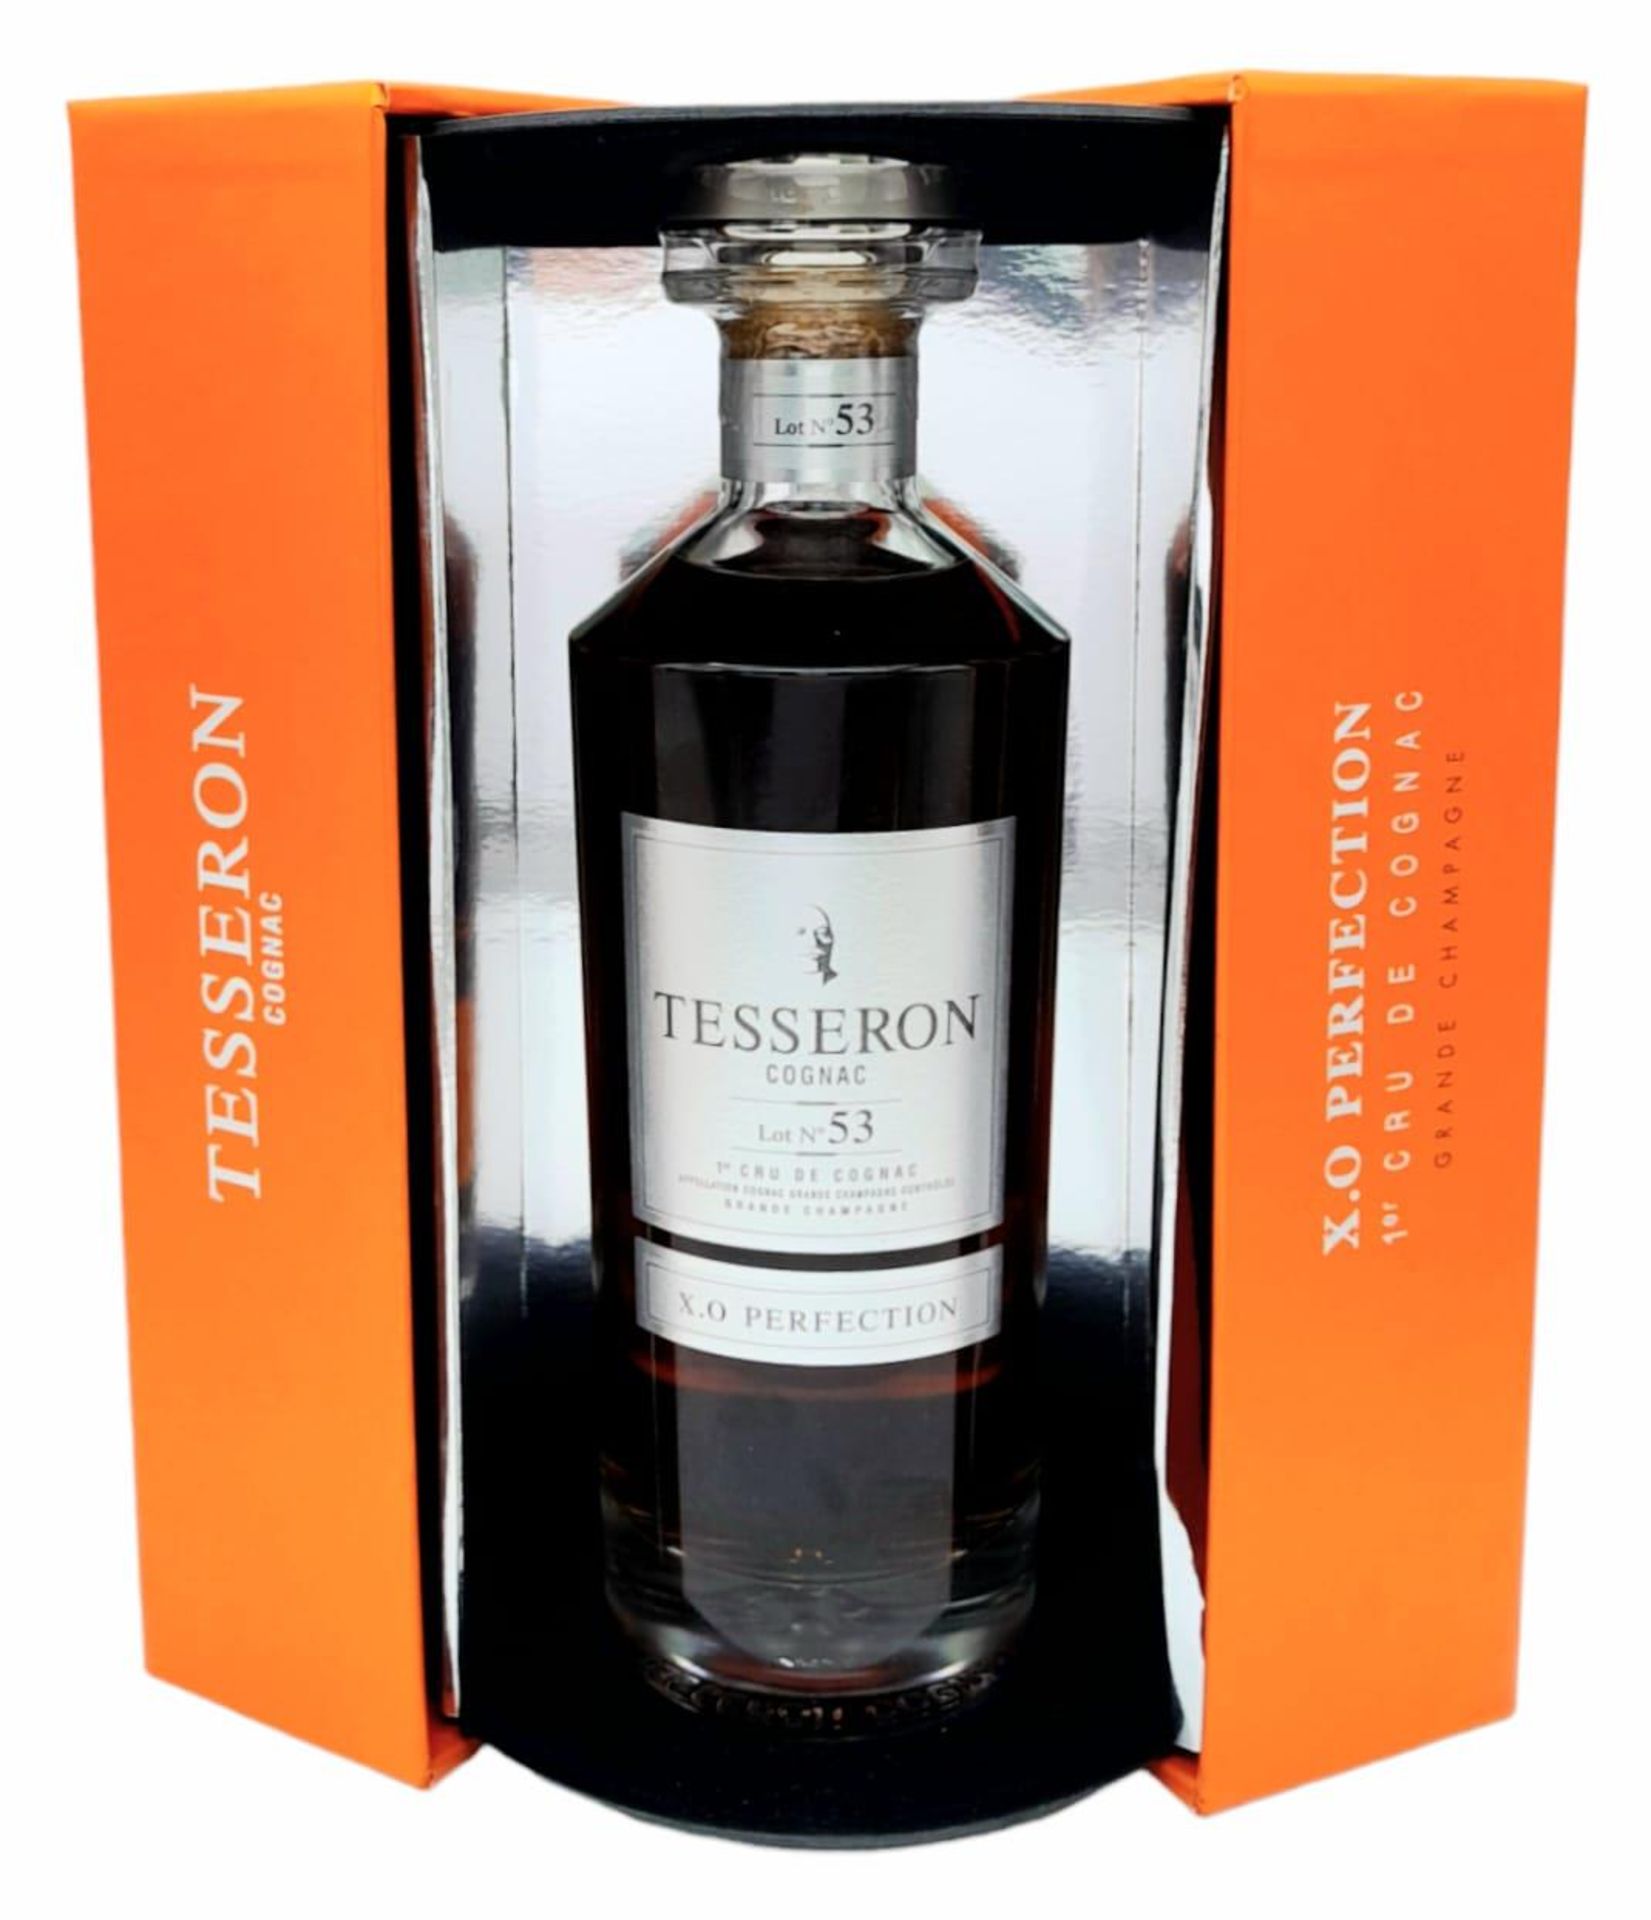 An Excellent Condition Bottle of Tesseron XO Perfection ‘Lot 53’ 1st Cru Cognac. In its Presentation